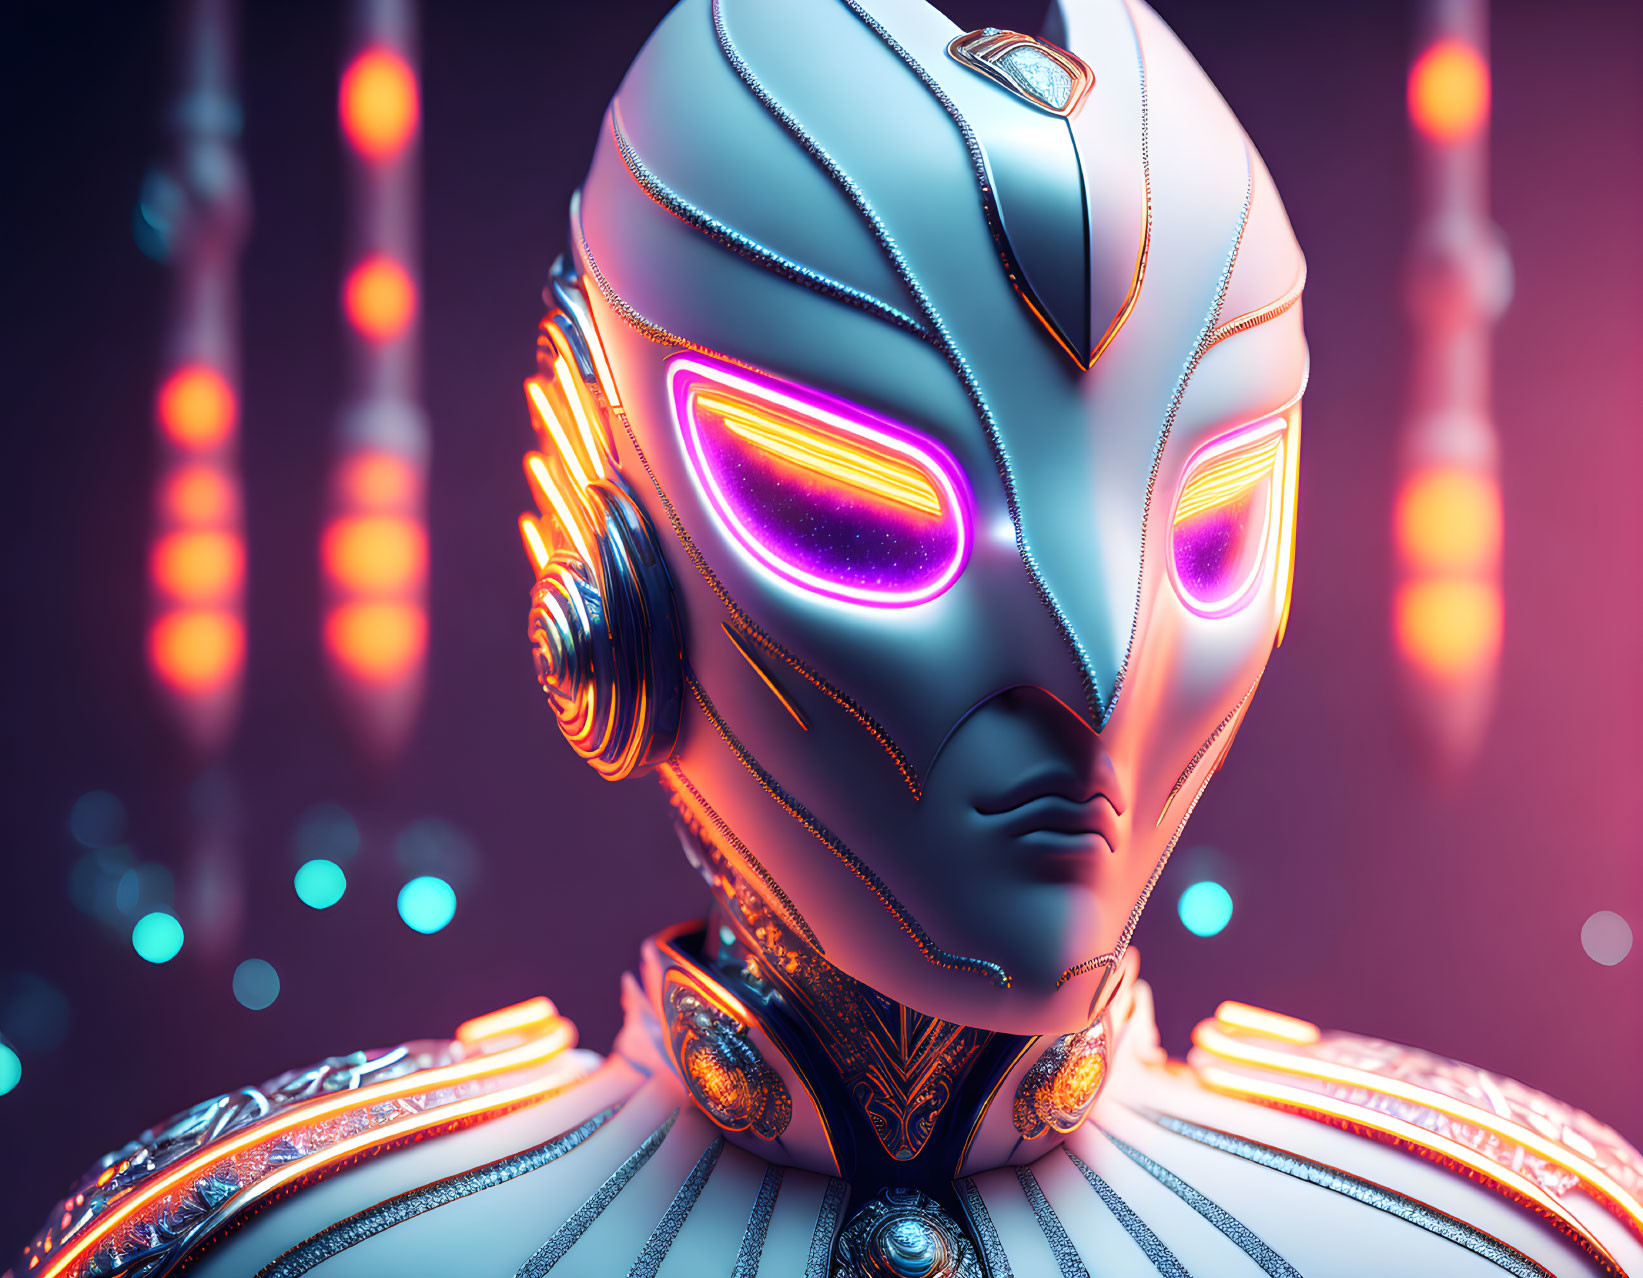 Futuristic robot with silver face and neon lights on blurred background